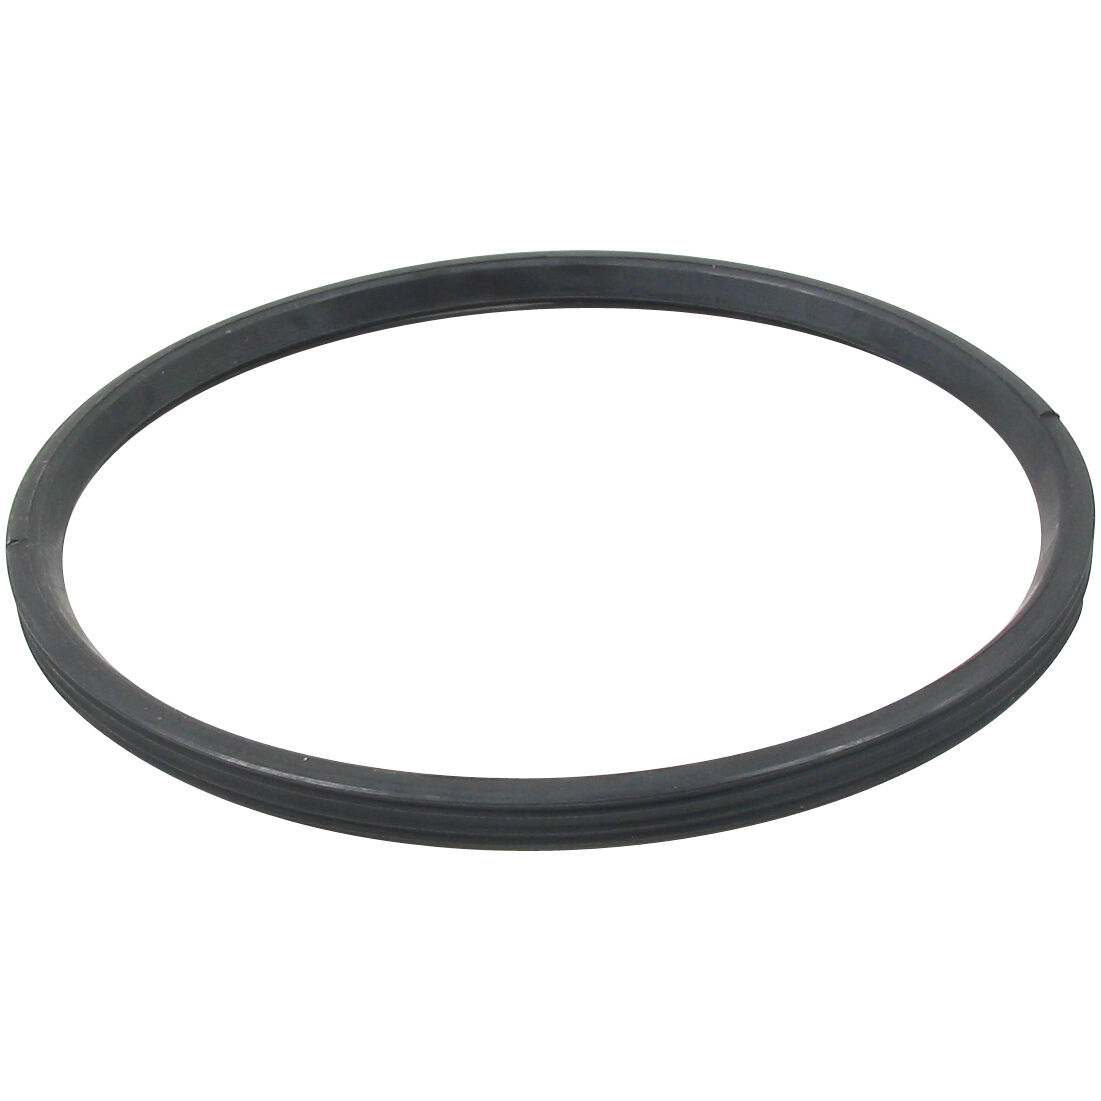 Product Image - Sealing ring-pipes-EPDM